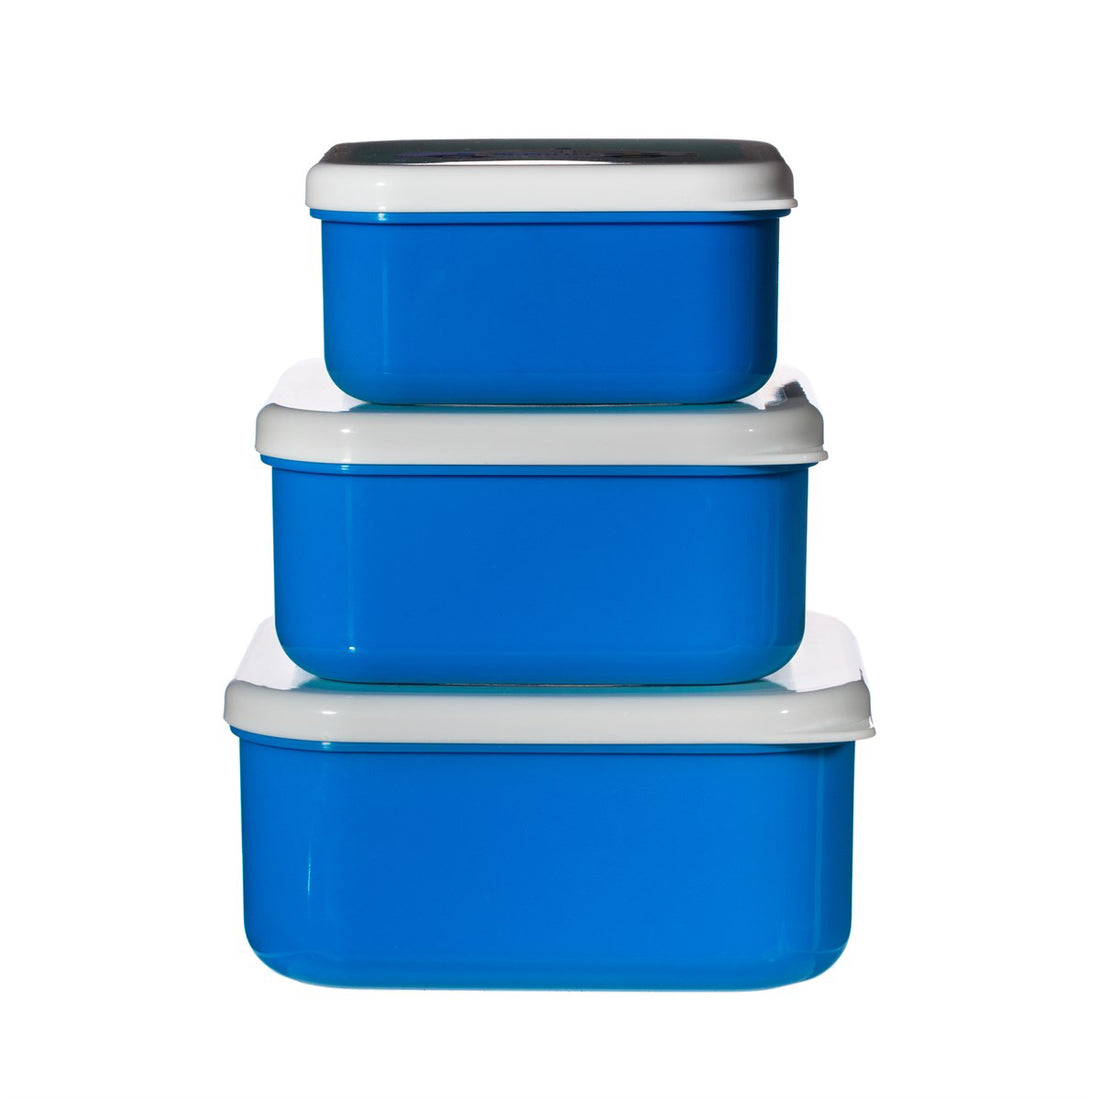 rjb-stone-transport-lunch-boxes-set-of-3-rjbs-maxi062 (6)